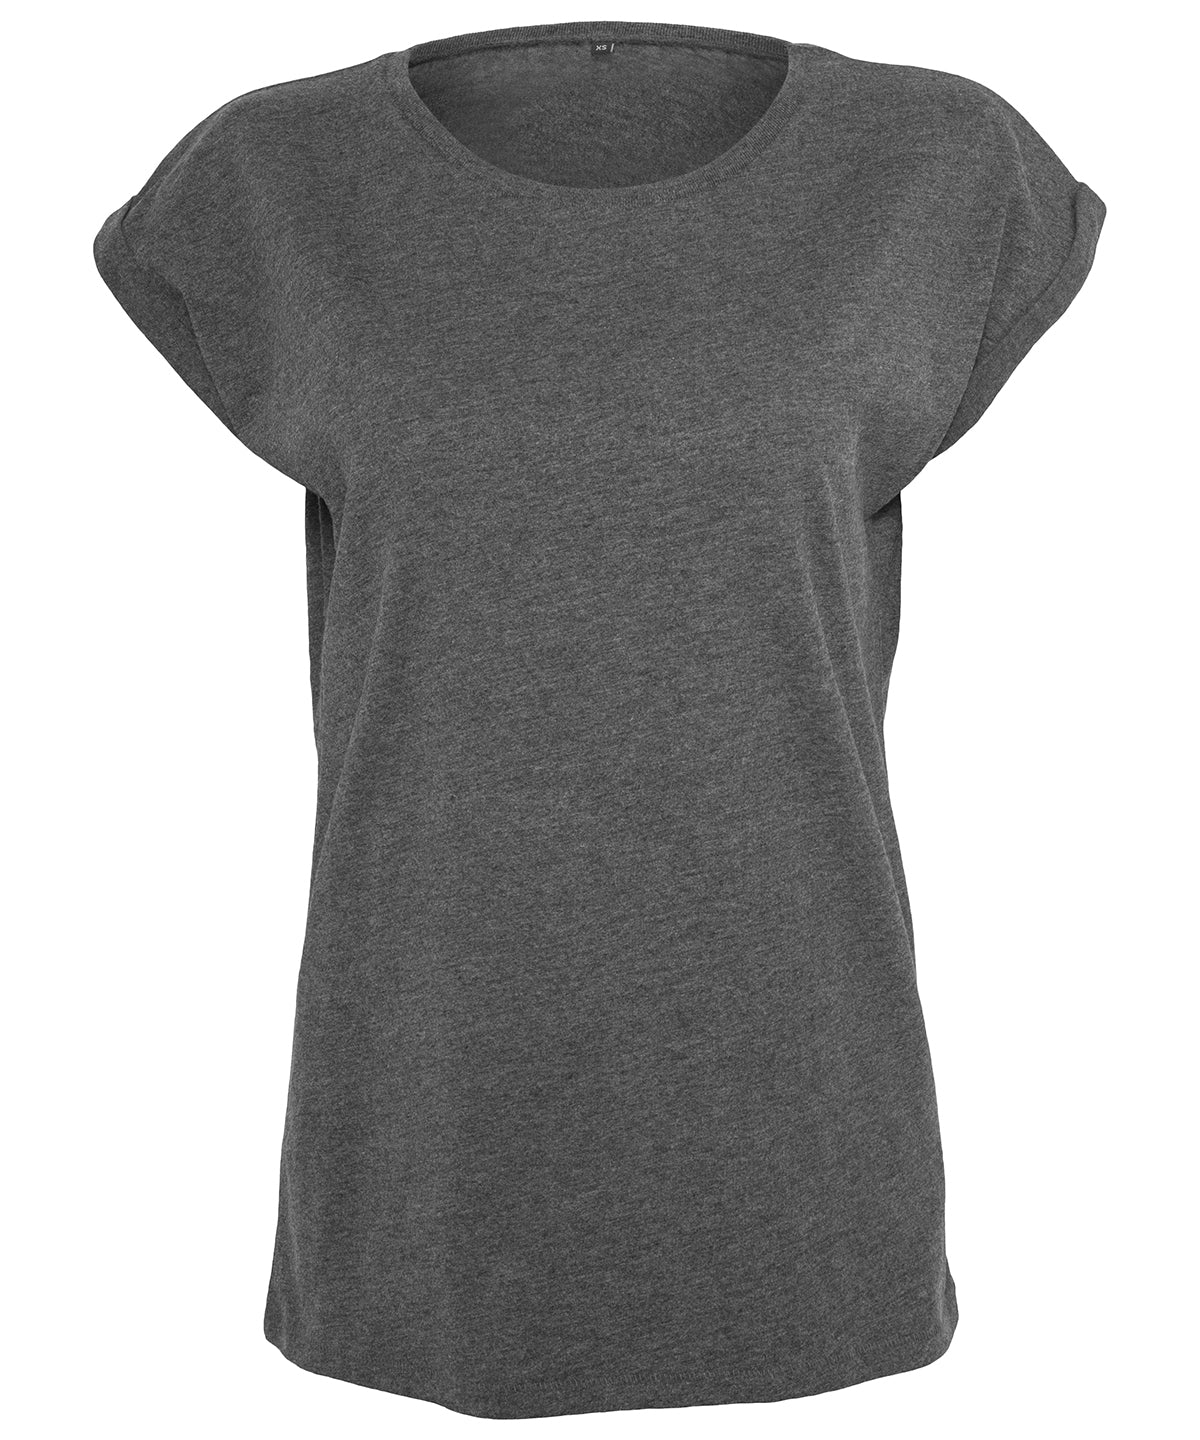 Personalised T-Shirts - Black Build Your Brand Women's extended shoulder tee